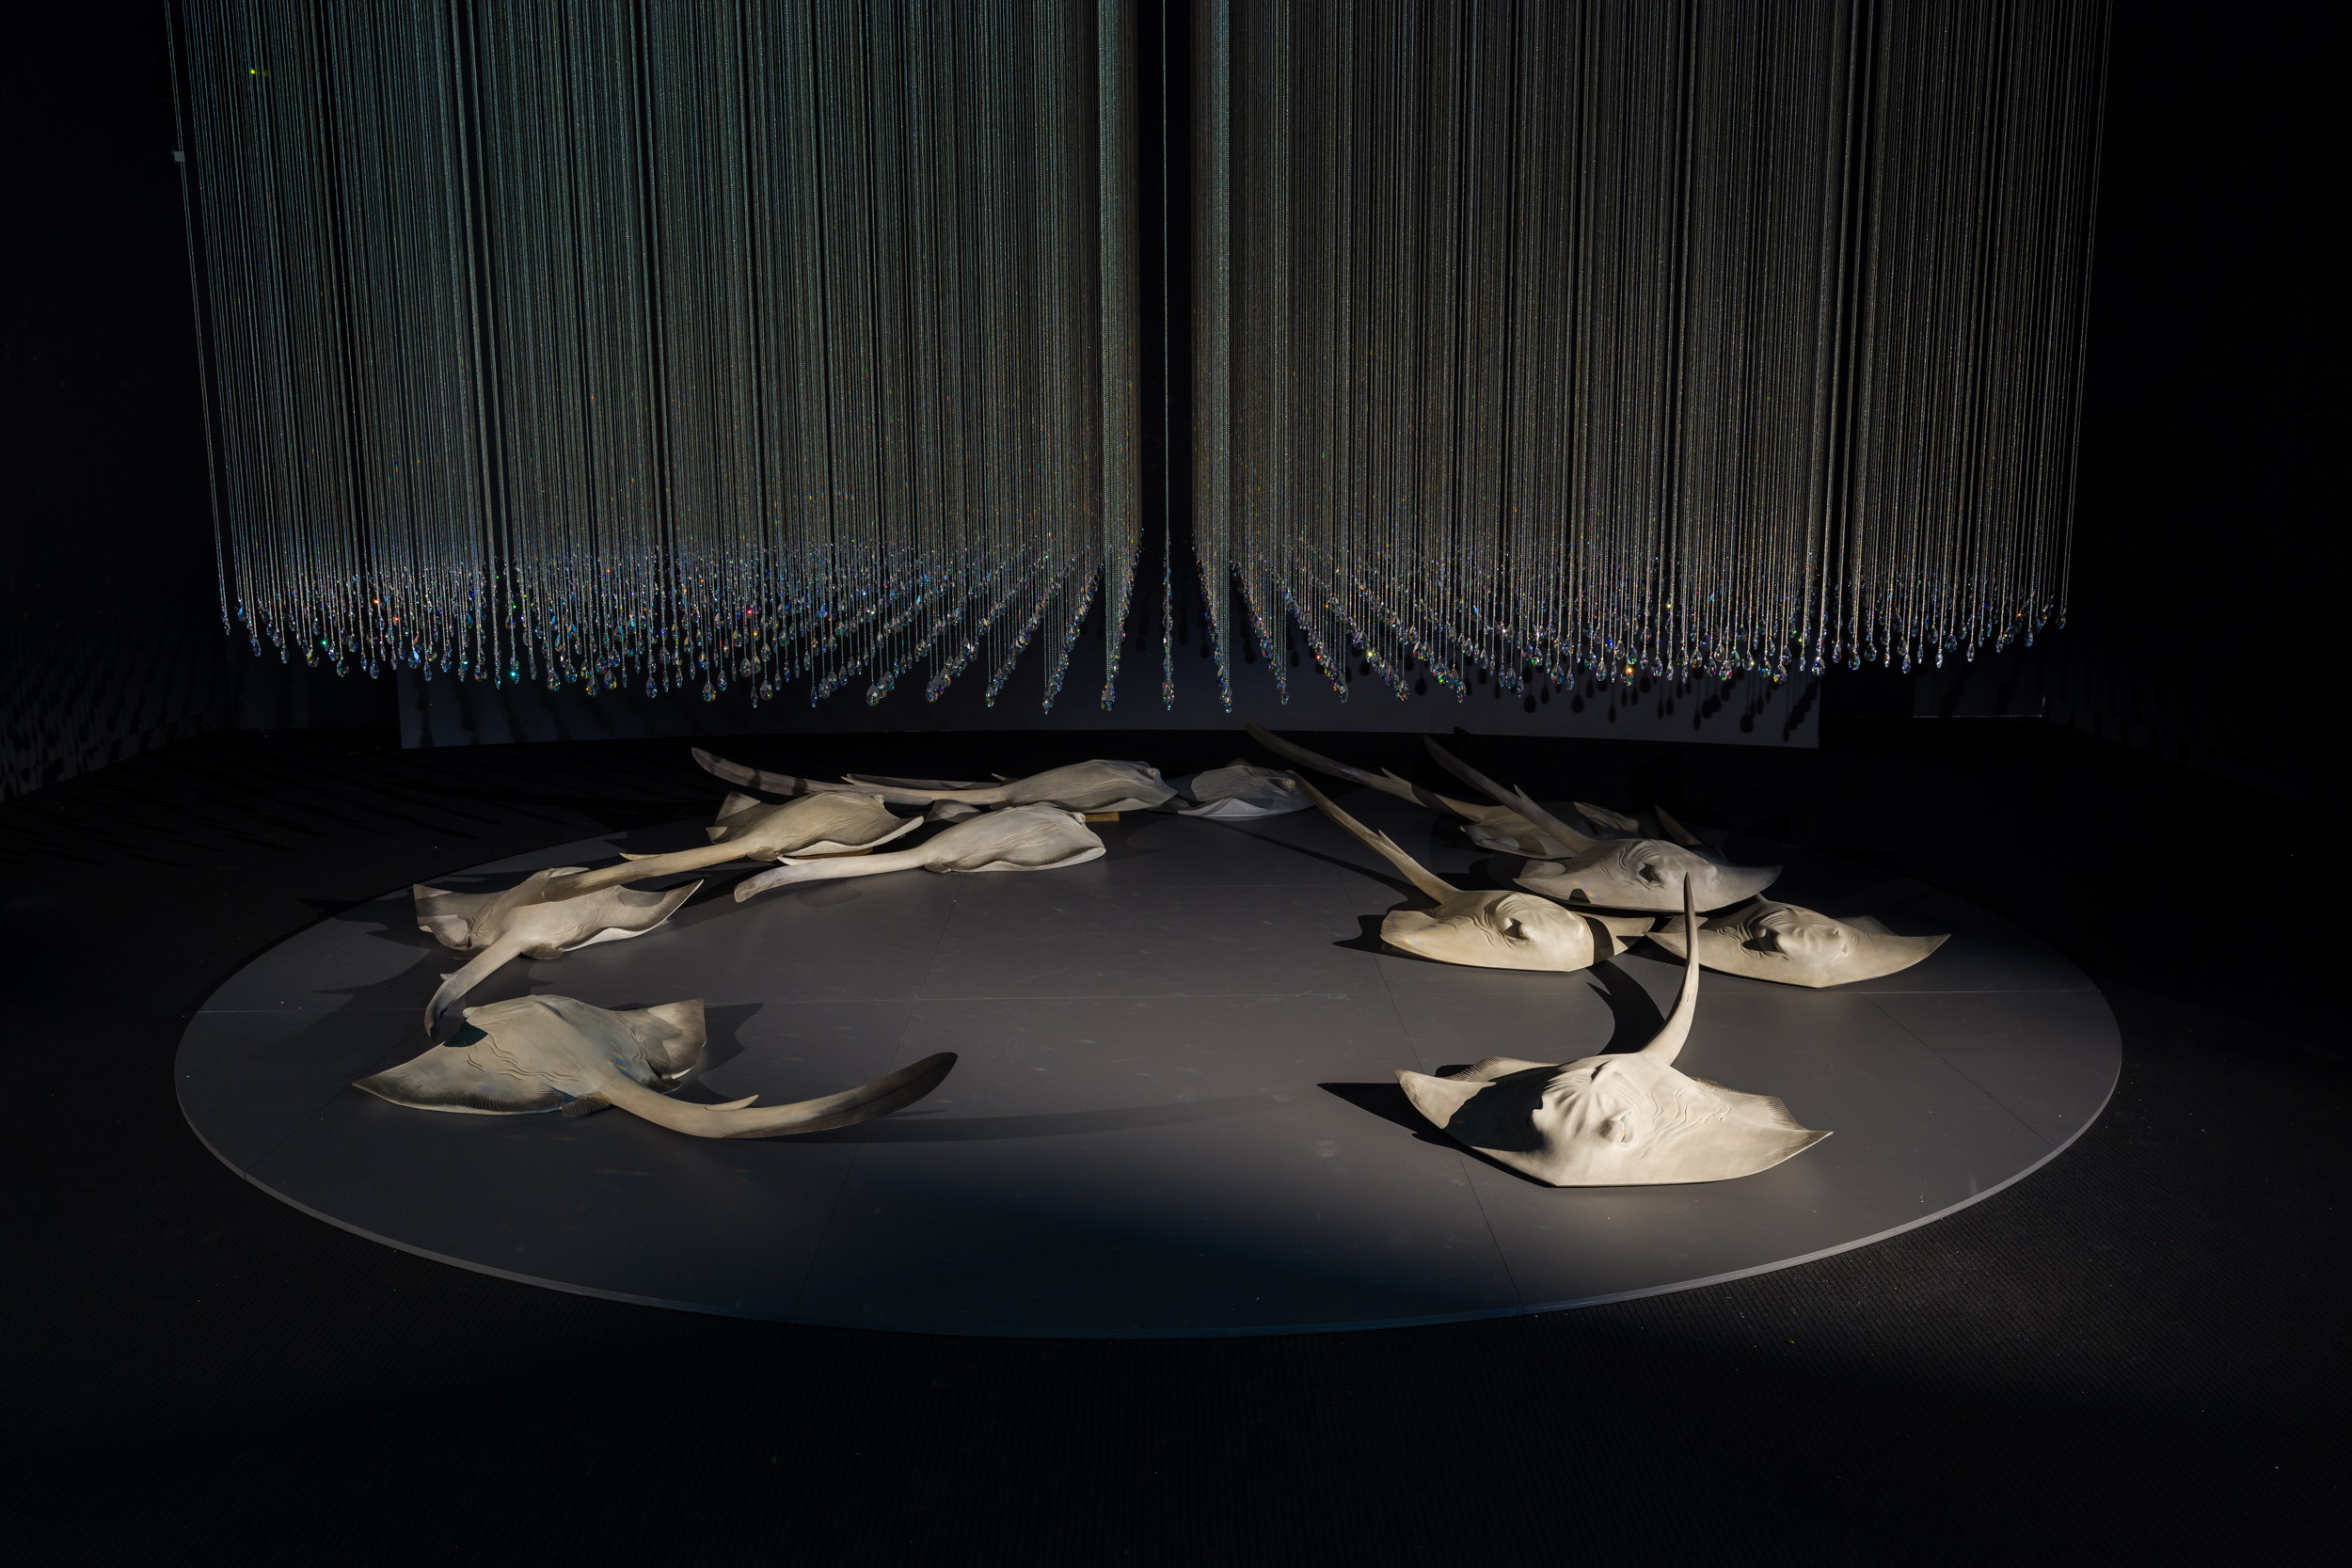 An artwork installation with crystals suspended from the ceiling and stingrays arranged in a circle on the floor